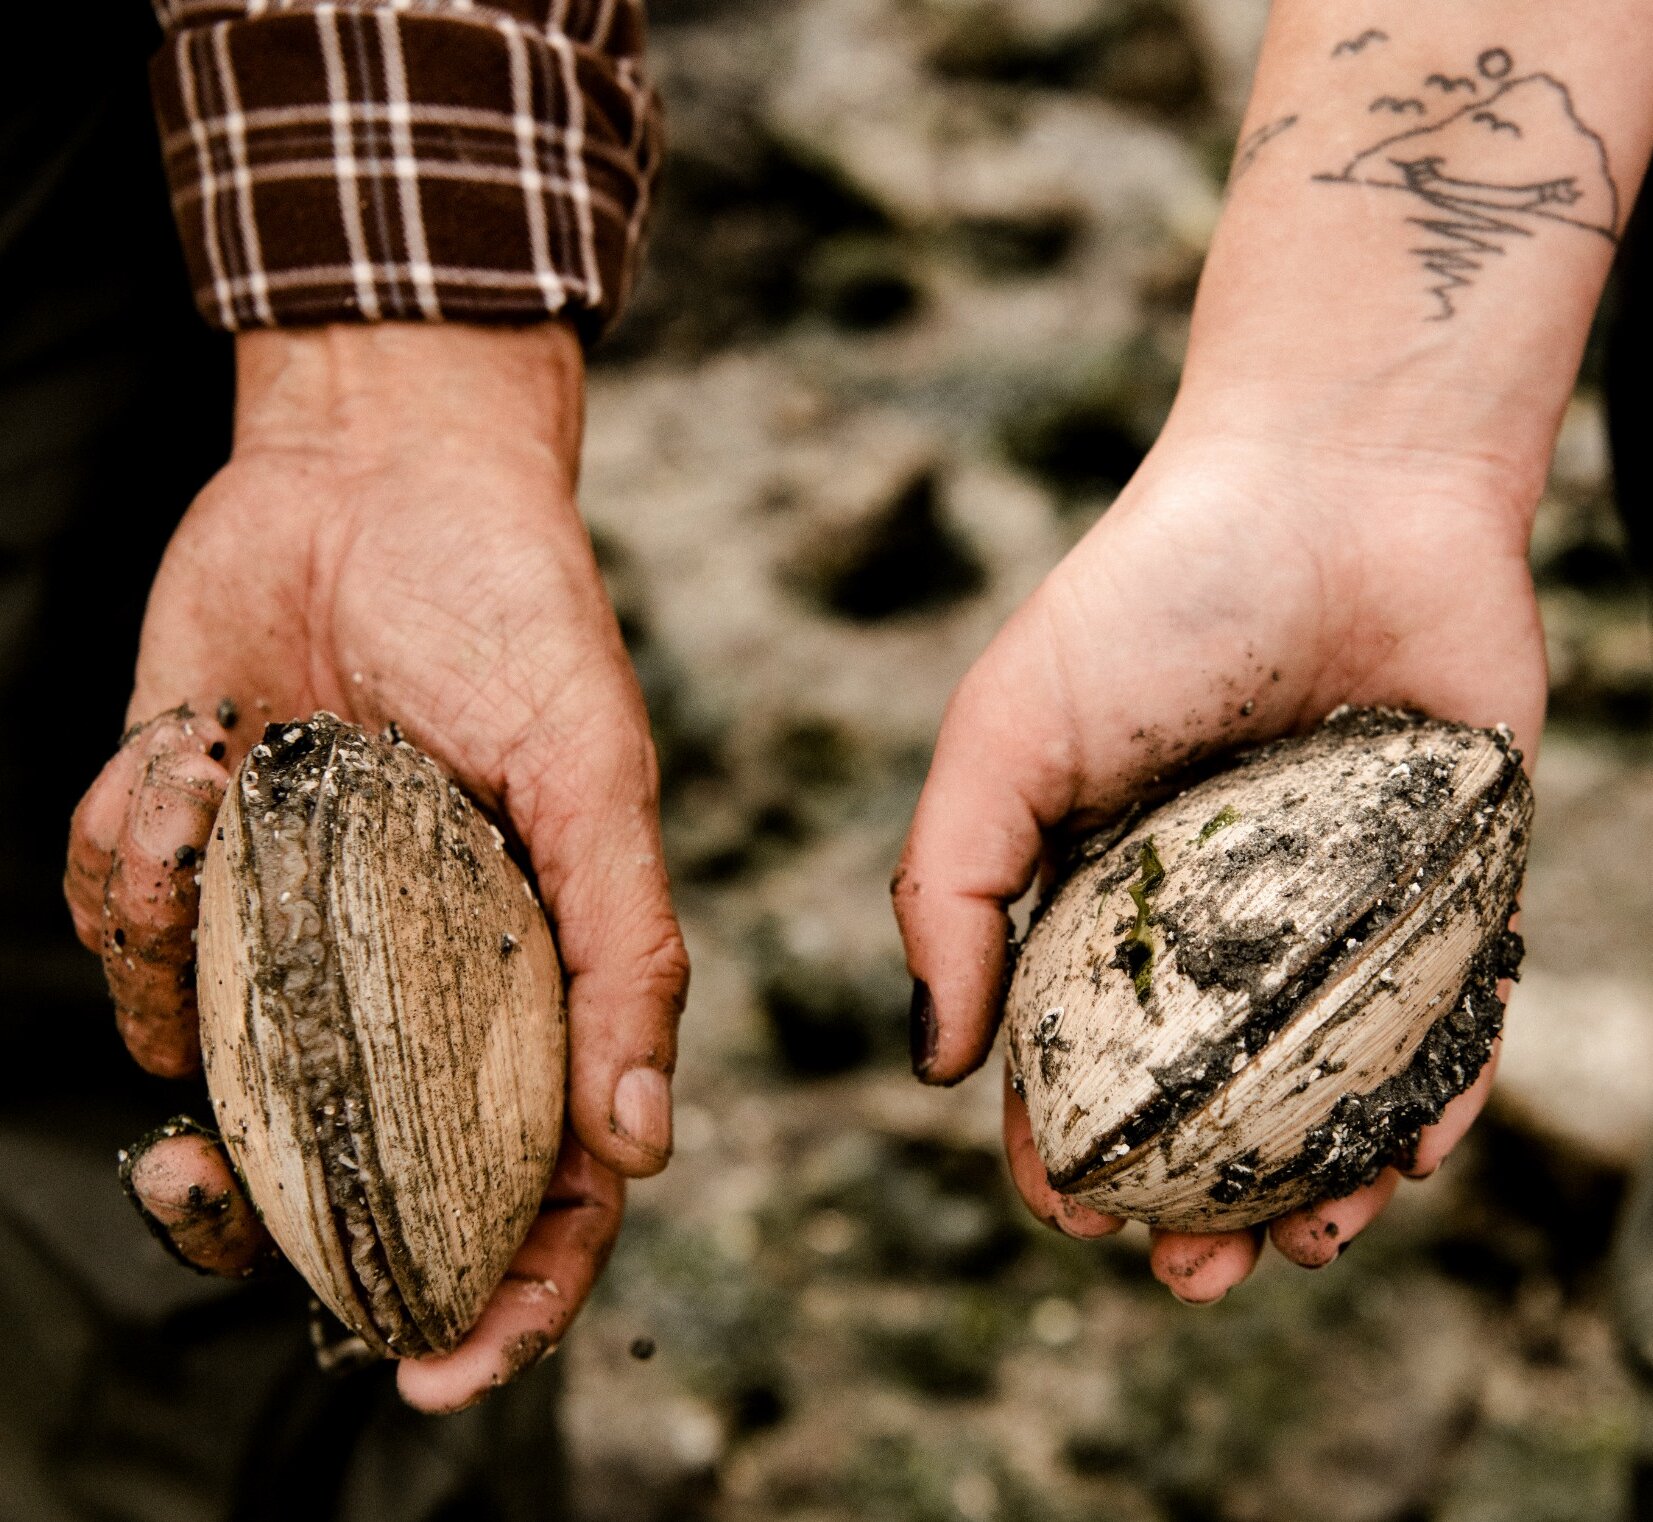 Two hands, one with a tattoo on the wrist, holding clams.